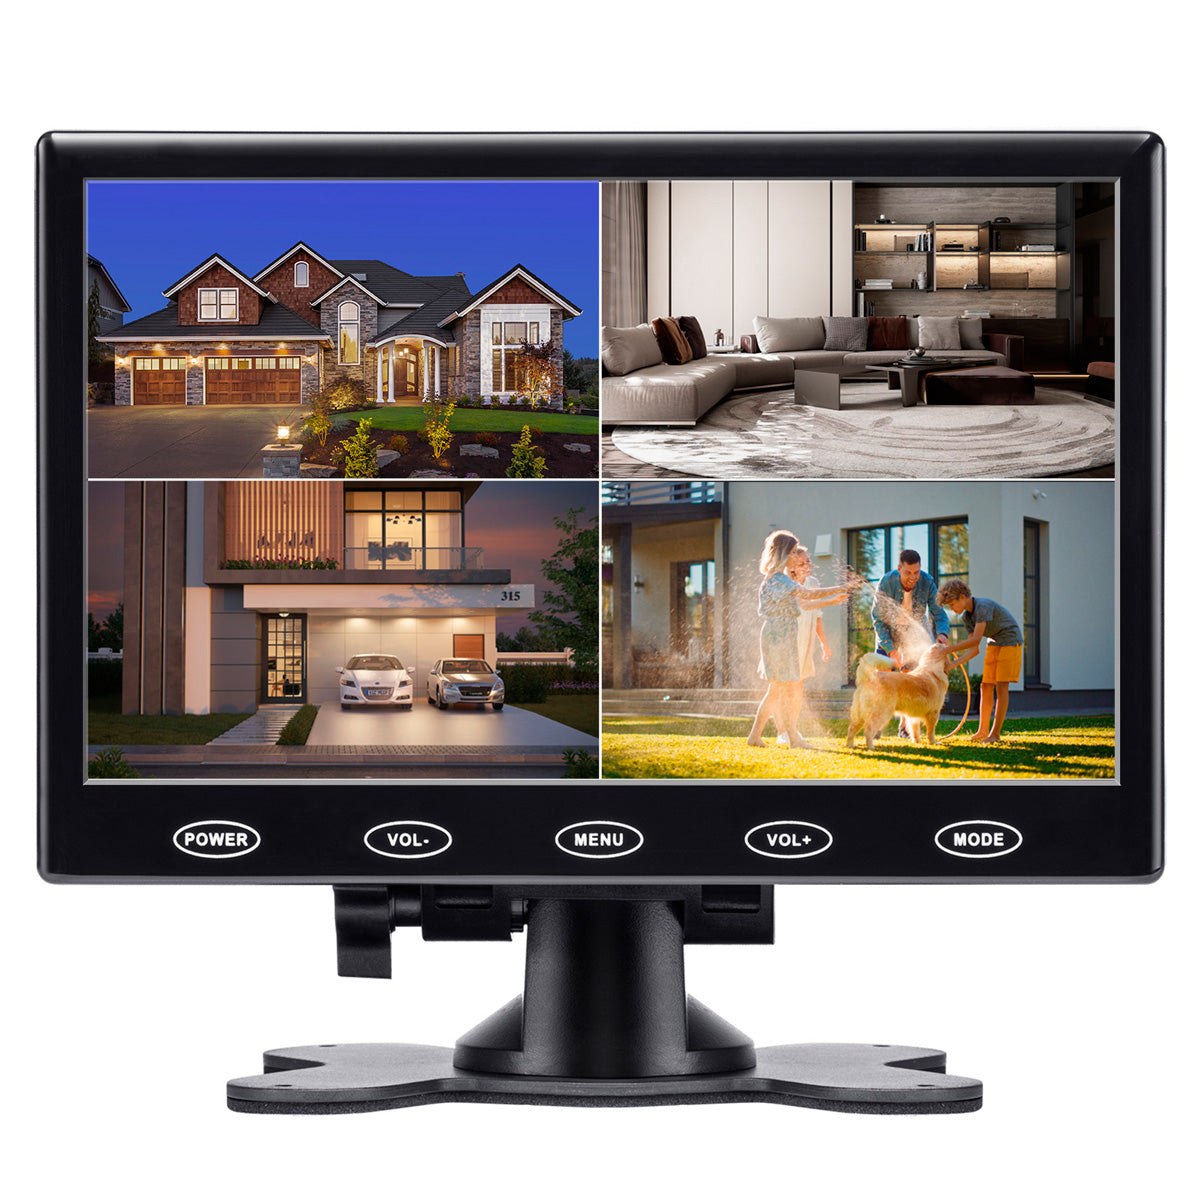 Campark D701 7" 800*480 Security Monitor, Support VGA/AV/HDMI/USB Interface Displays (Out Of Stock In US)